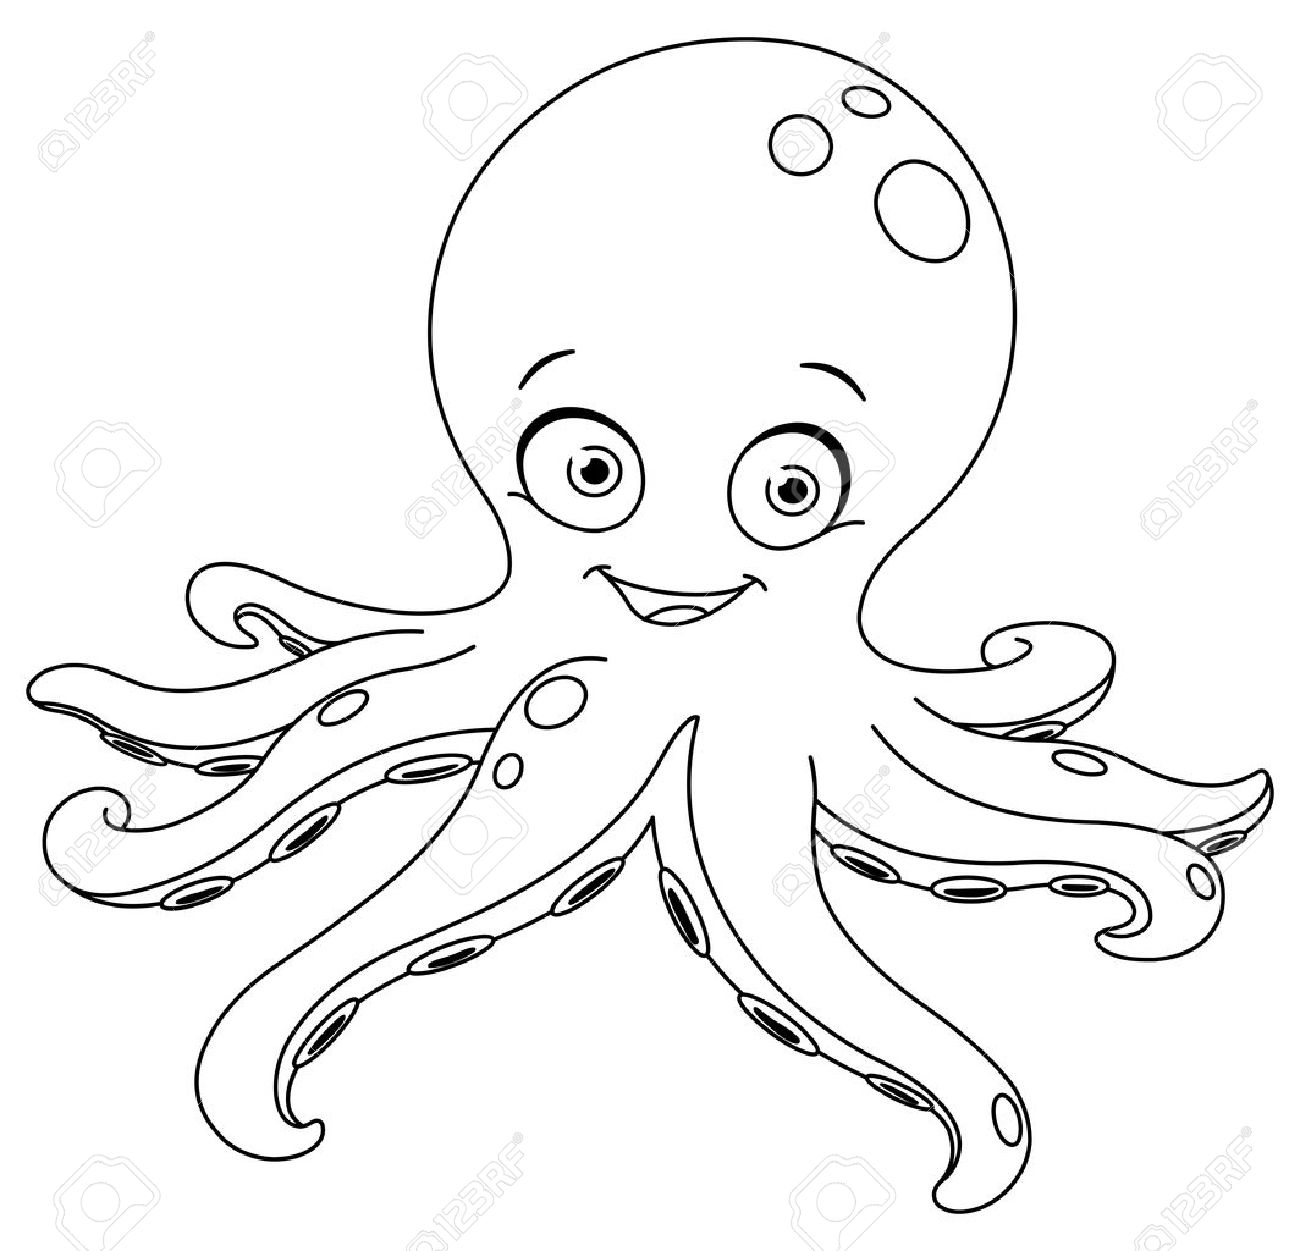 Outlined octopus coloring page royalty free svg cliparts vectors and stock illustration image